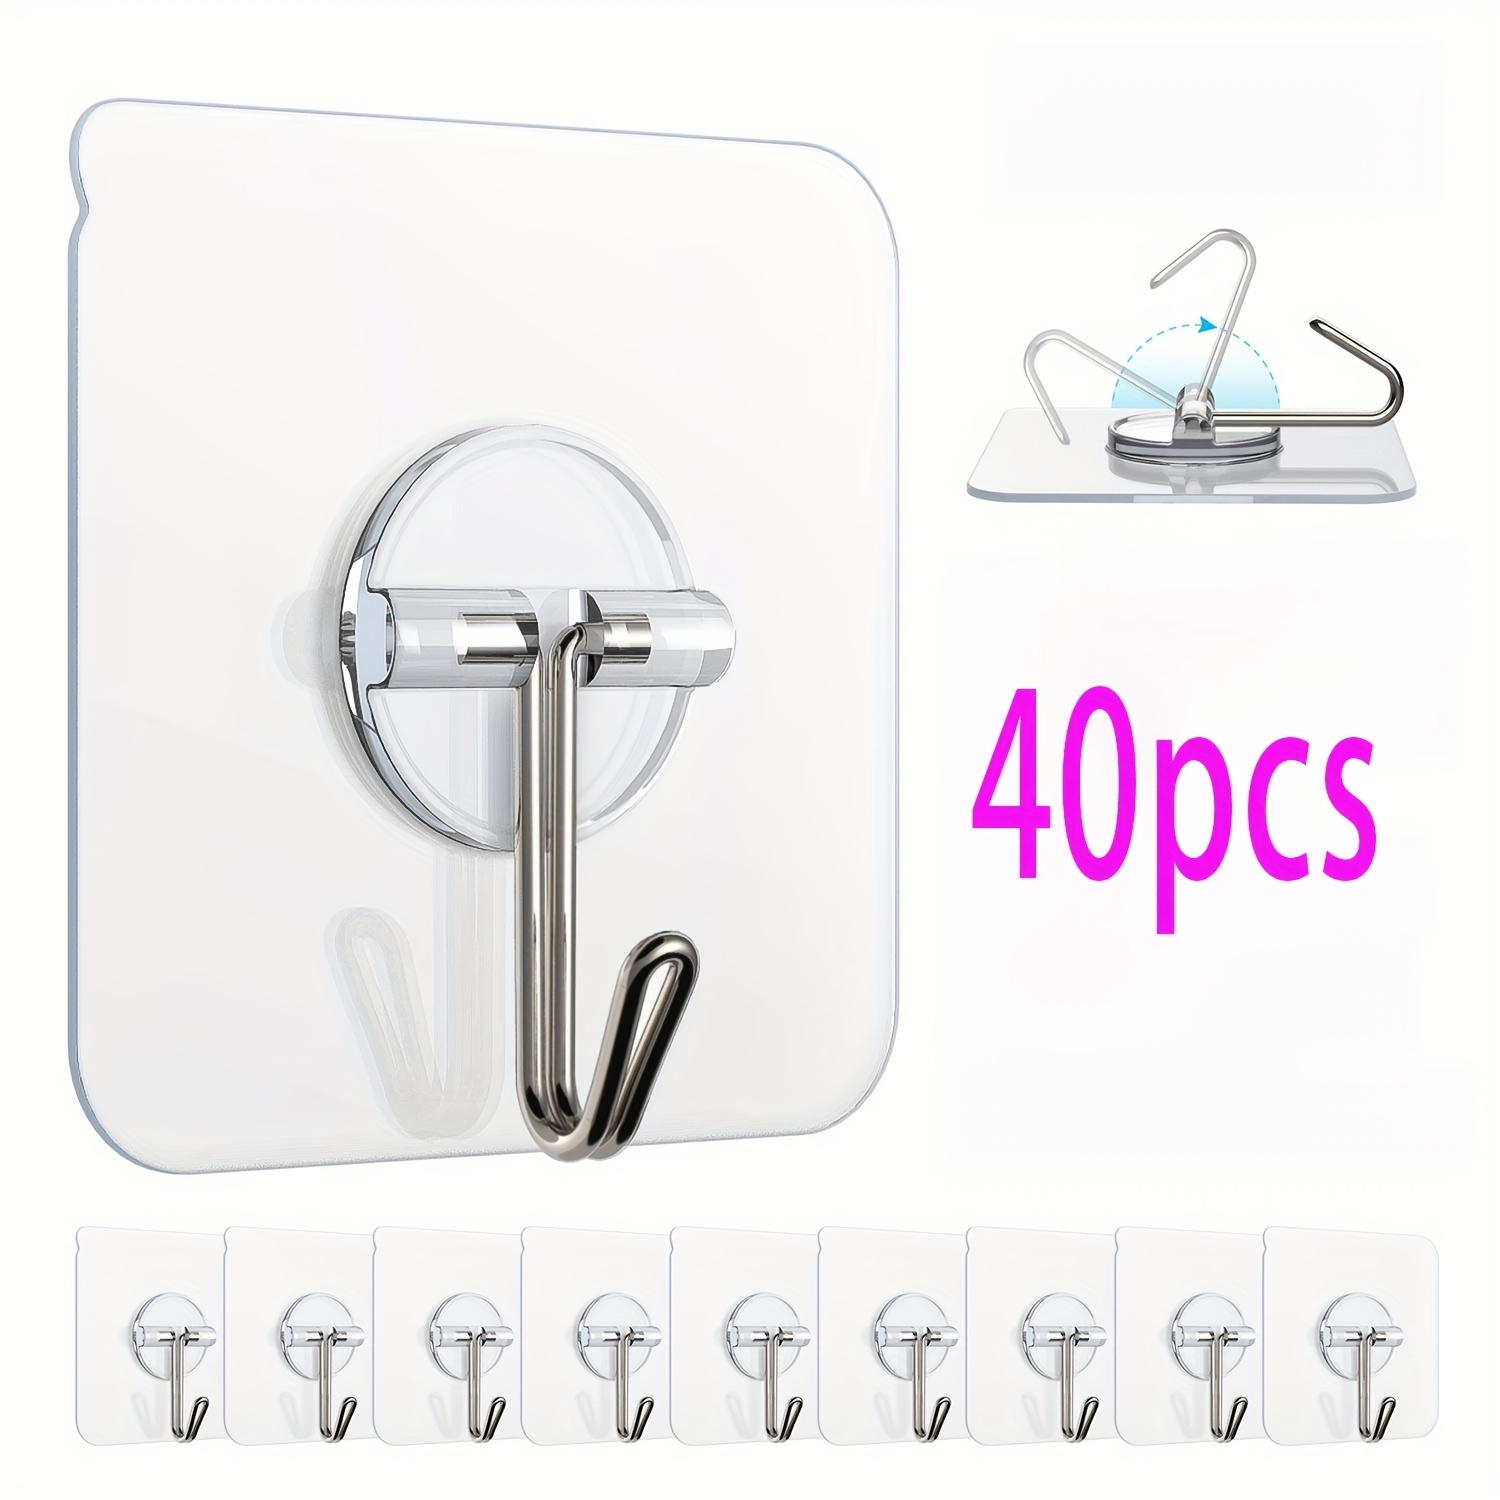 LOUXPERT Heavy Duty Adhesive-Hooks for Hanging - 17.6 lbs 6-Hooks, Clear  Sticky-Hooks, Stainless Steel Wall Hangers, Waterproof-Hook for Home